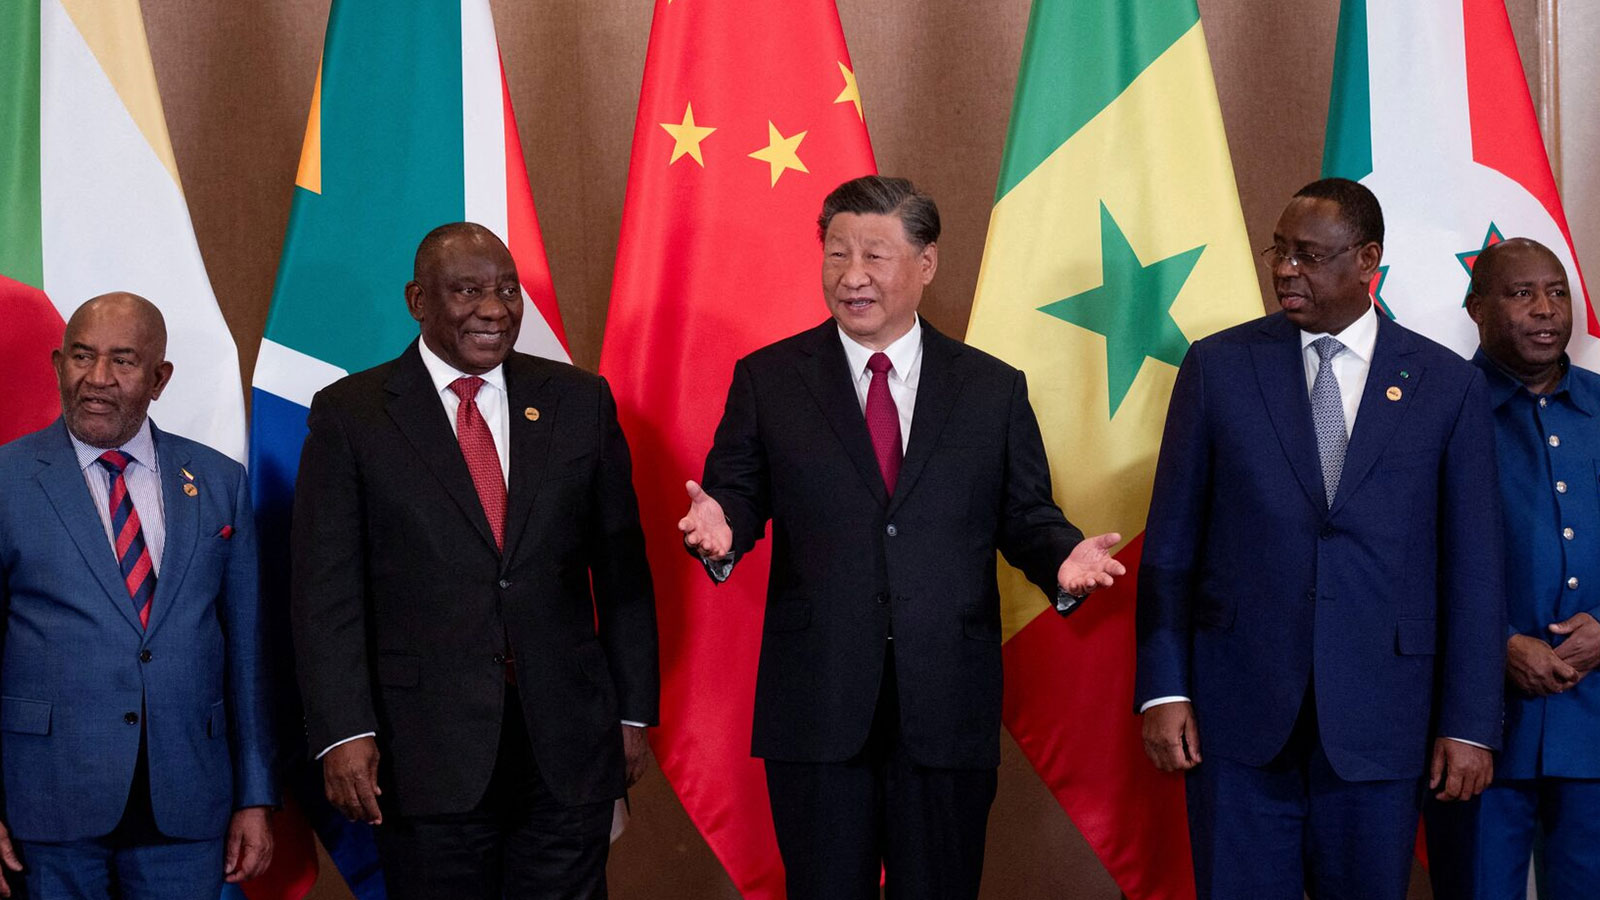 Post-COVID, China is back in Africa and doubling down on minerals